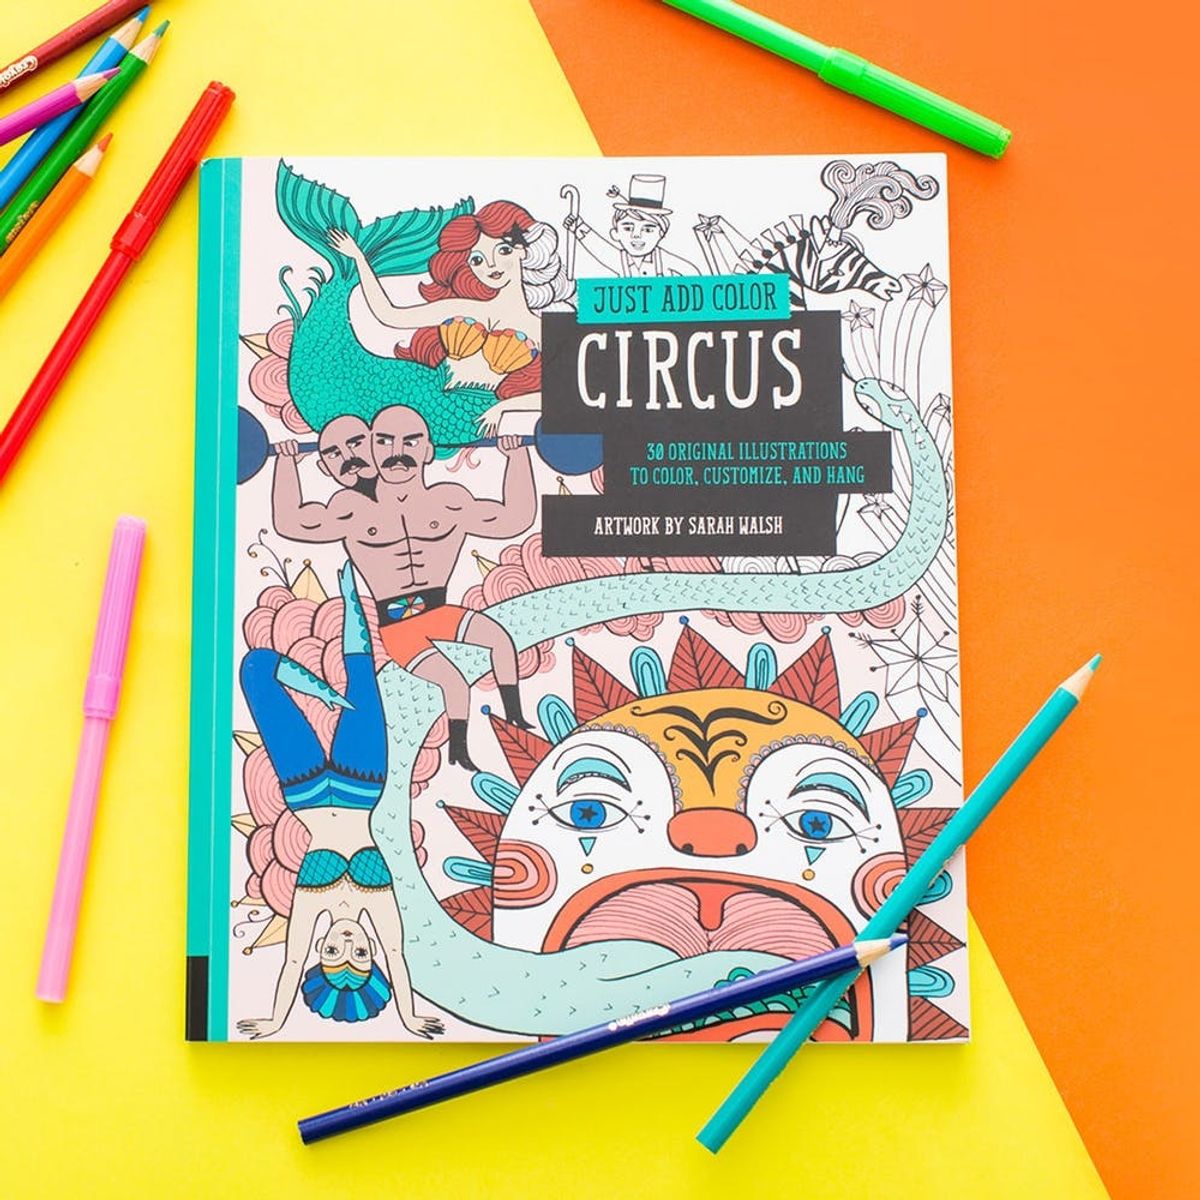 What Happens When a 24-Year-Old and 4-Year-Old Review the Same Coloring Book